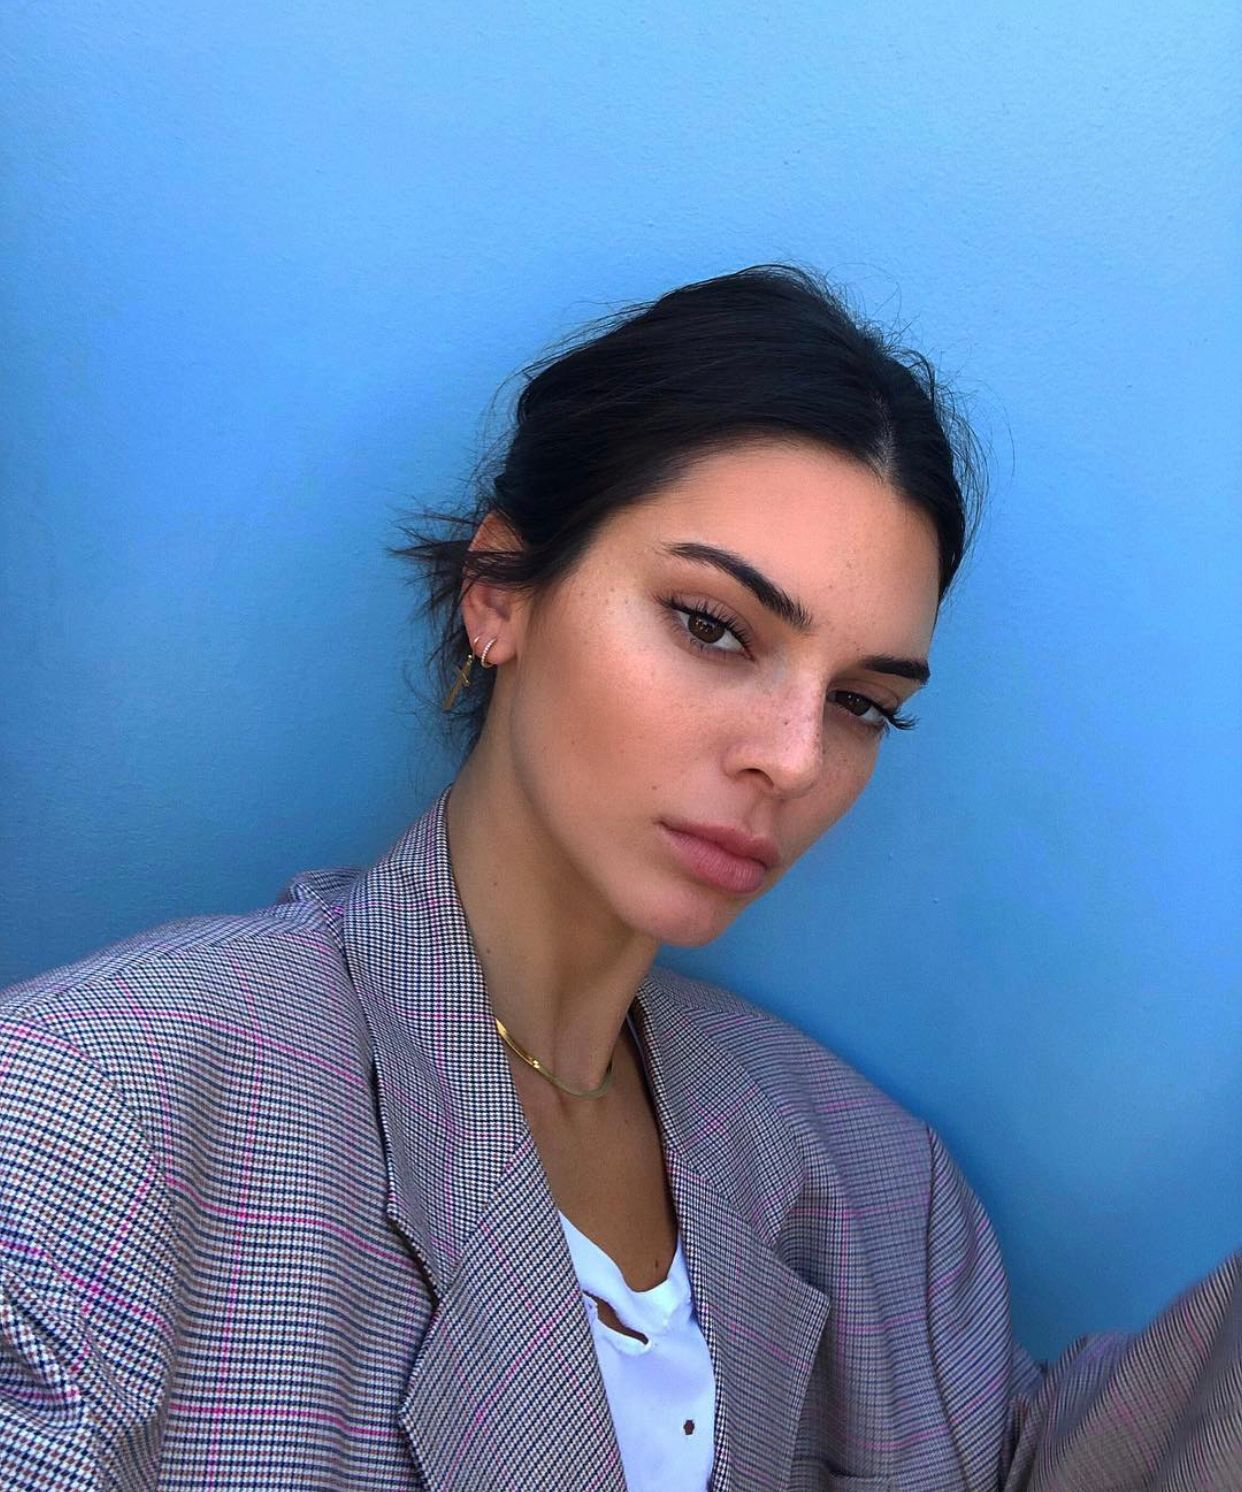 Kendall Jenner wearing a gray jacket